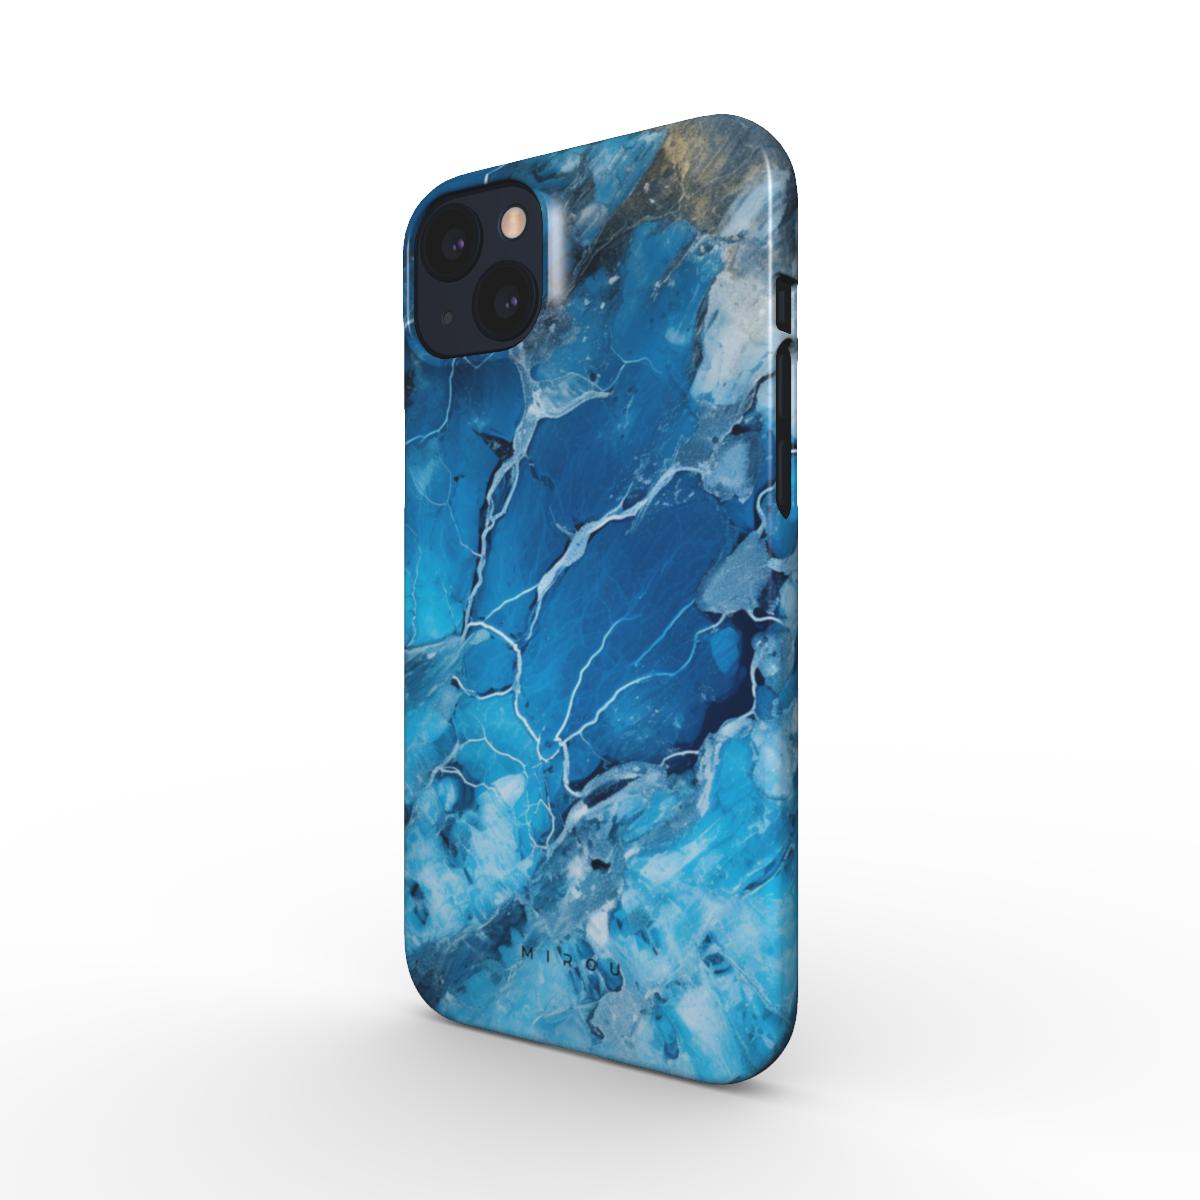 Icy Blue Dream - Snap Phone Case